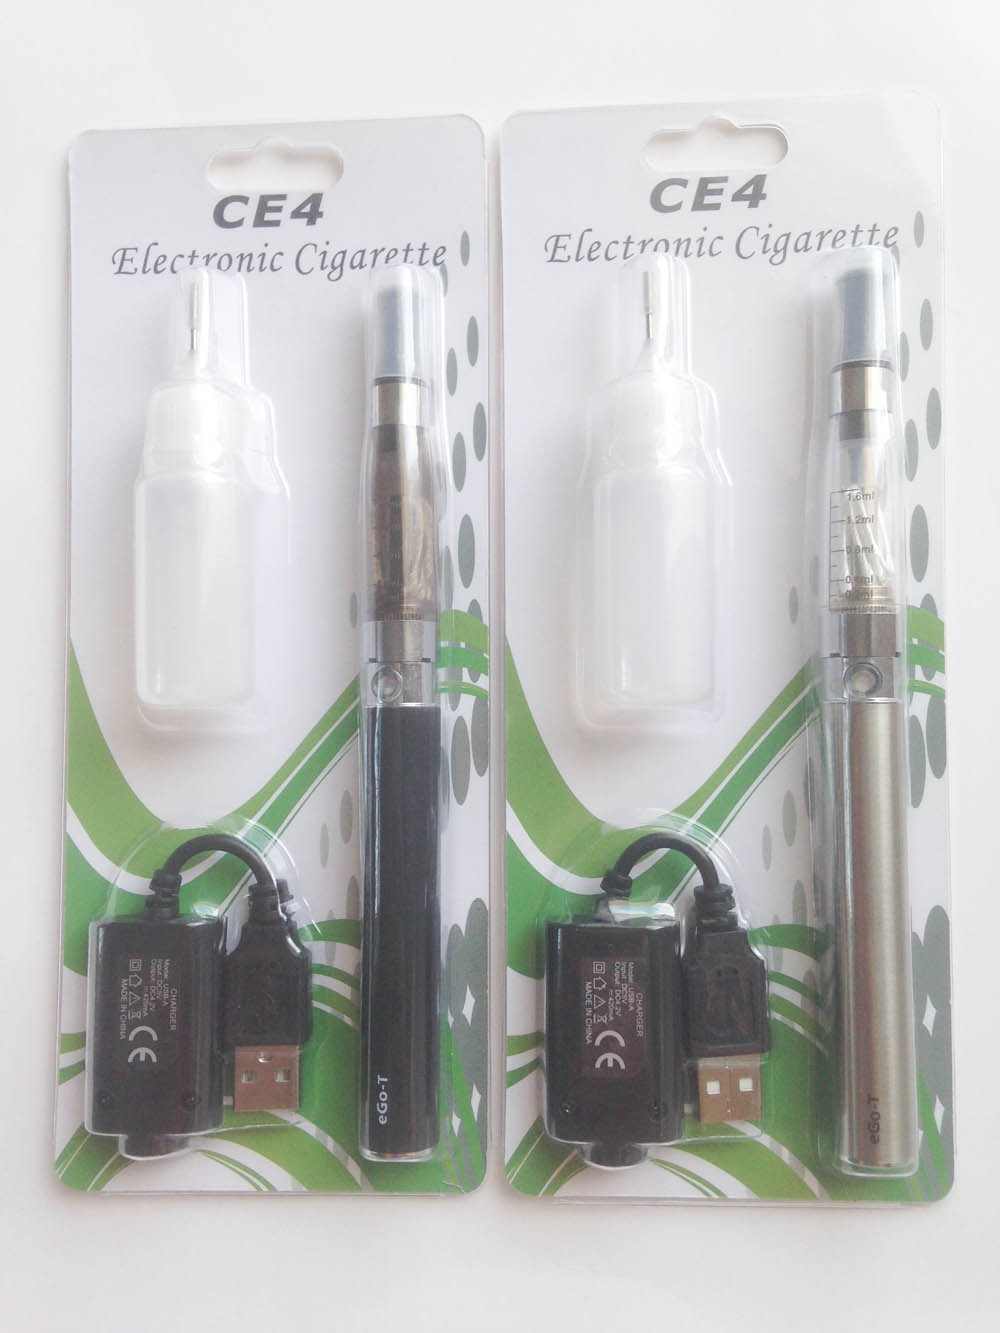 CE4 EGO Blister Package Kits_11